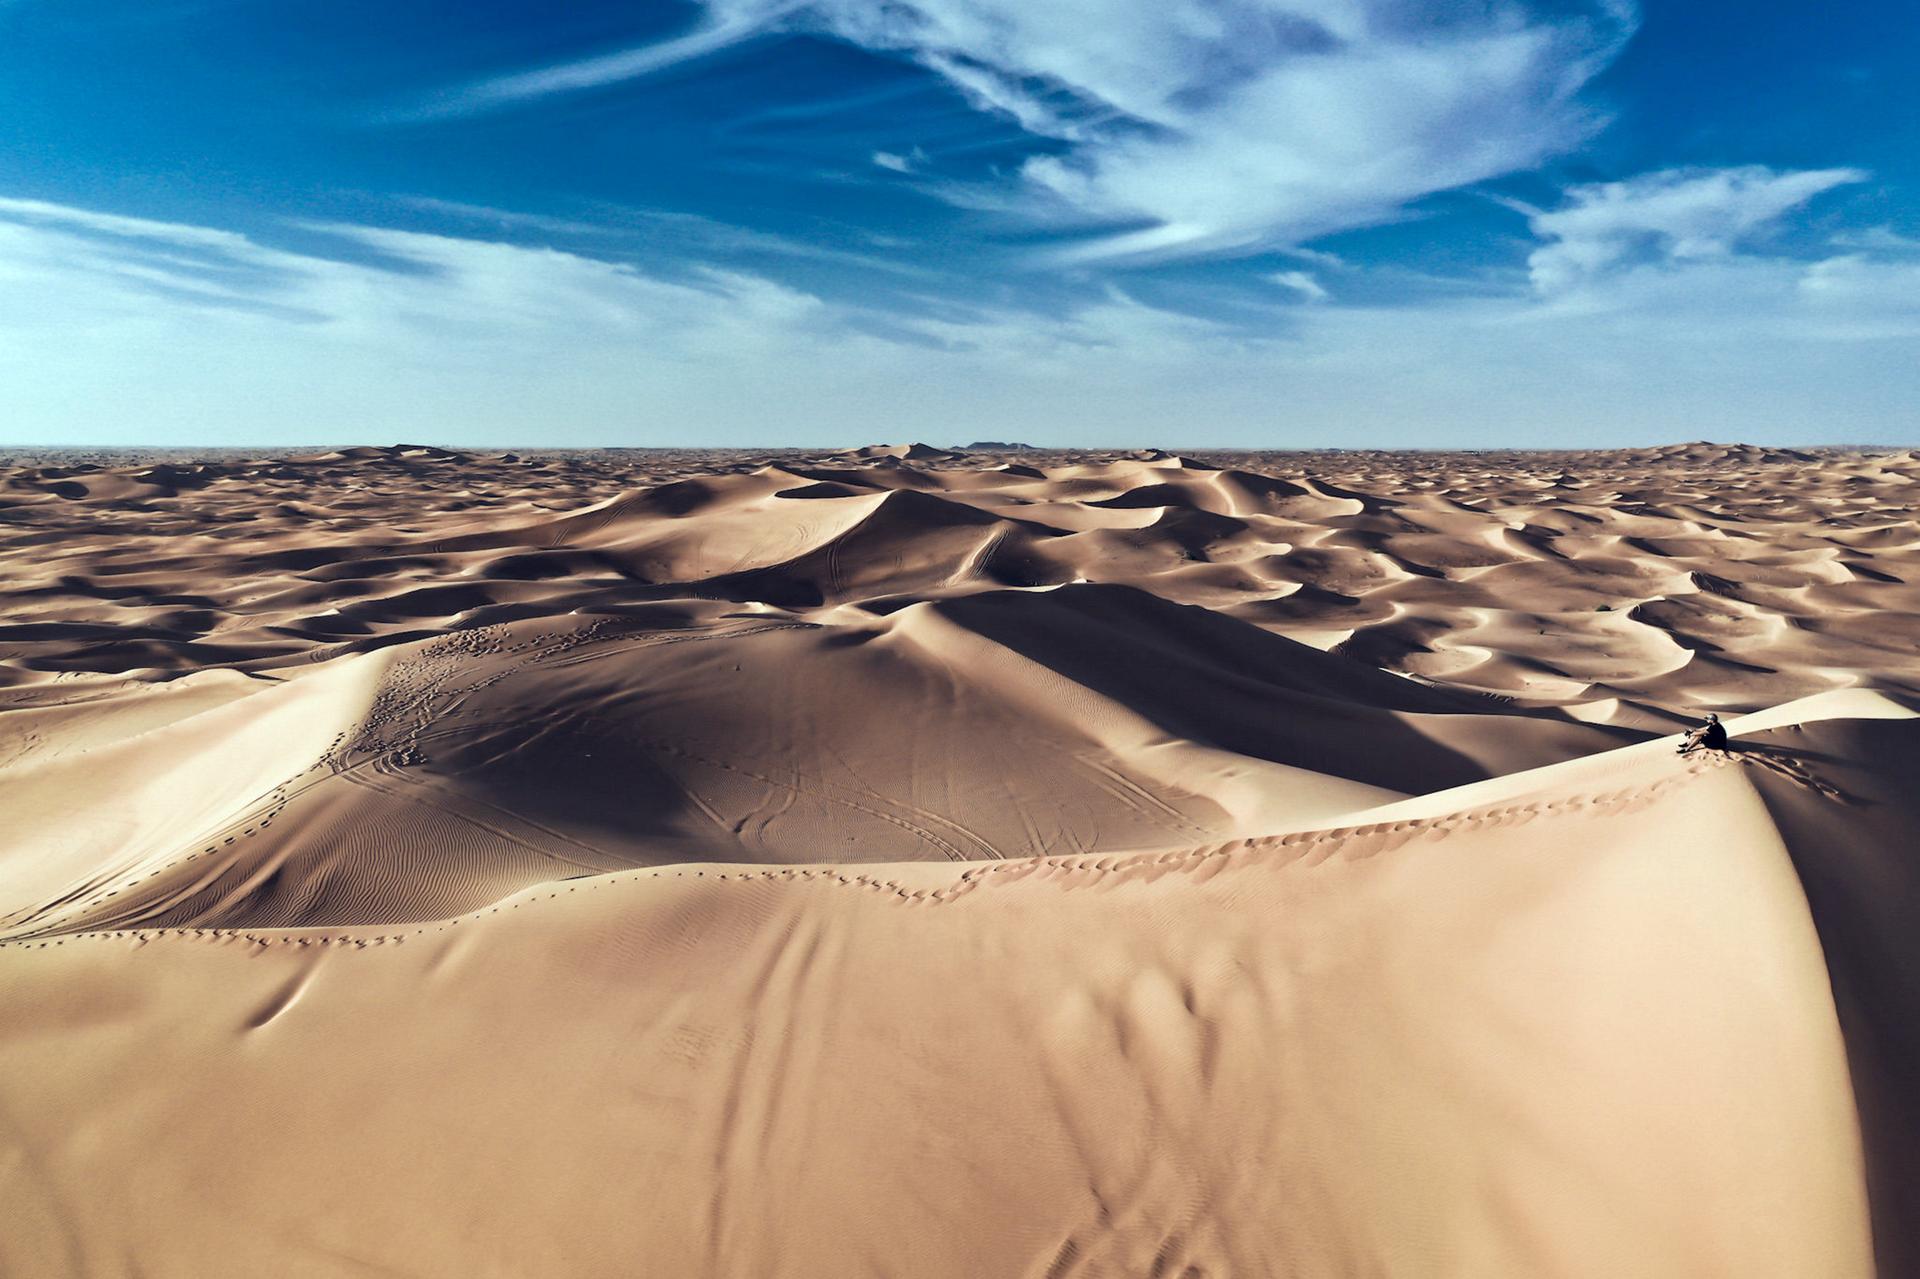 Sand dunes 'communicate' when they move, researchers say - The Washington  Post